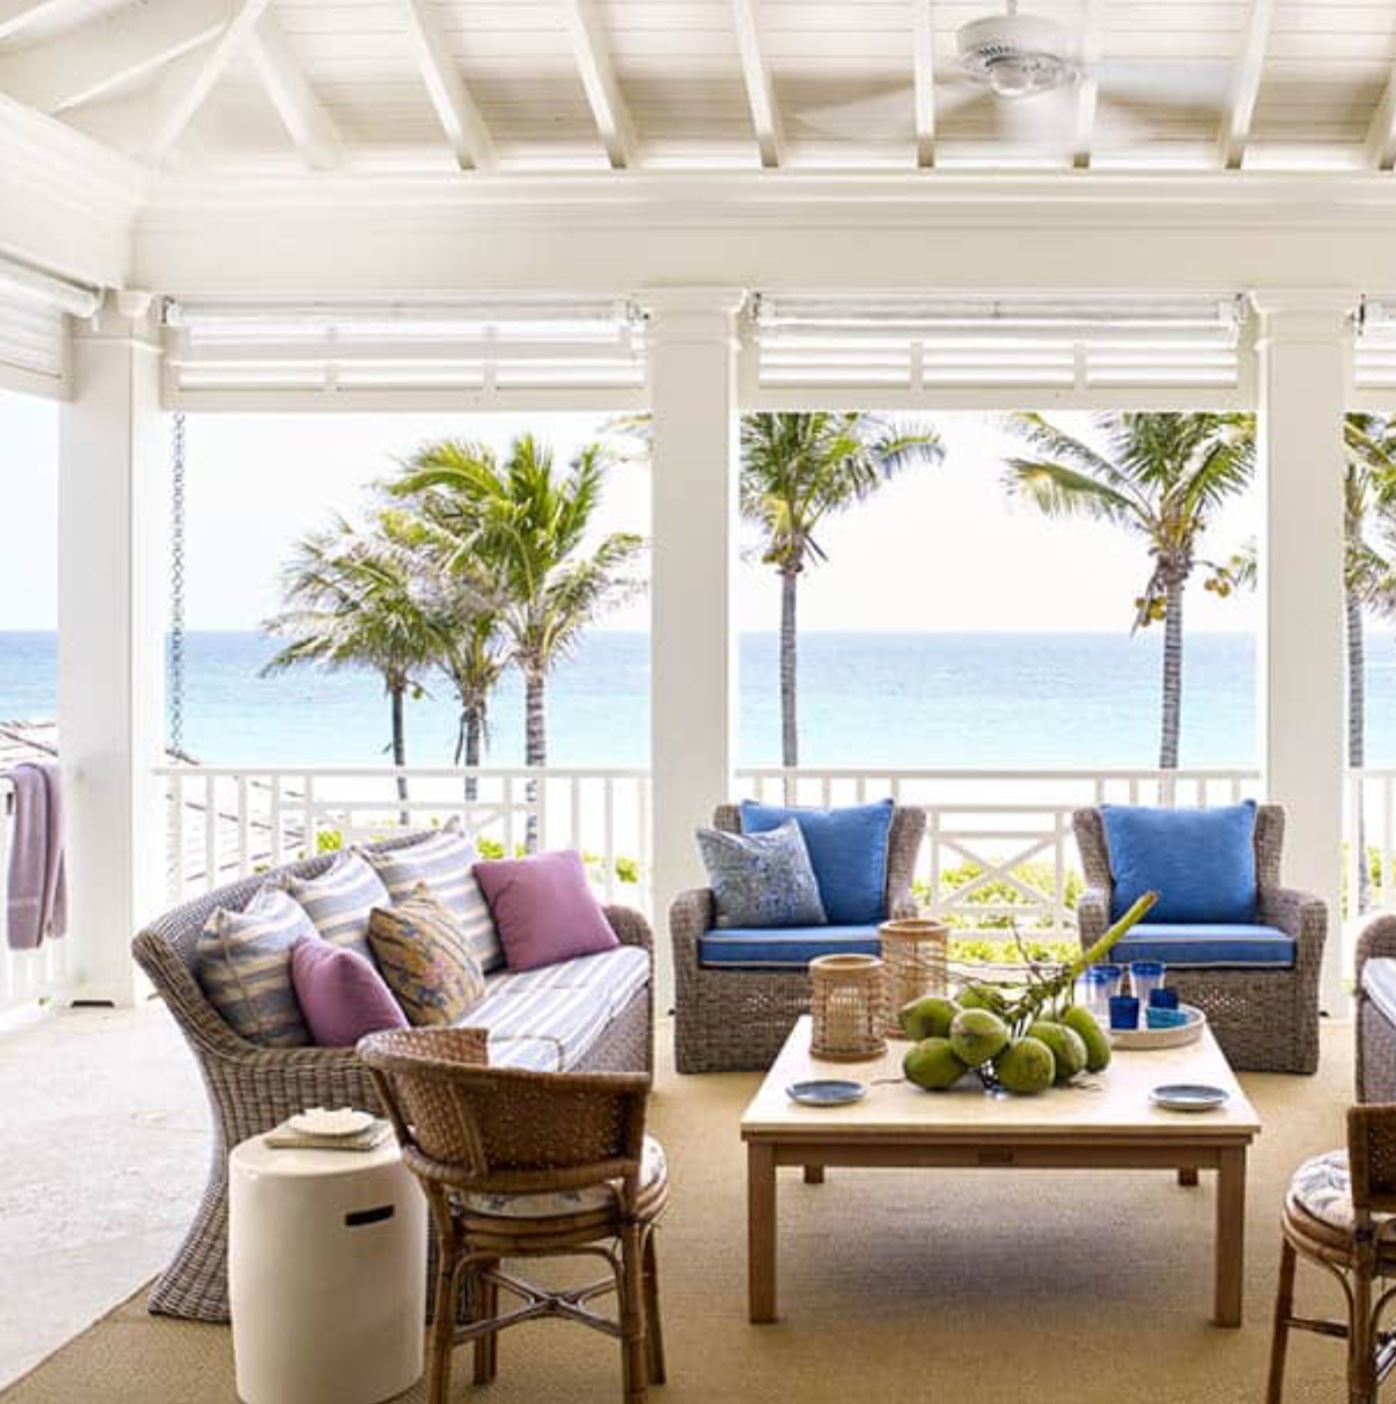 A Beach Home Decorated With Blue and Rattan: Bahama Style